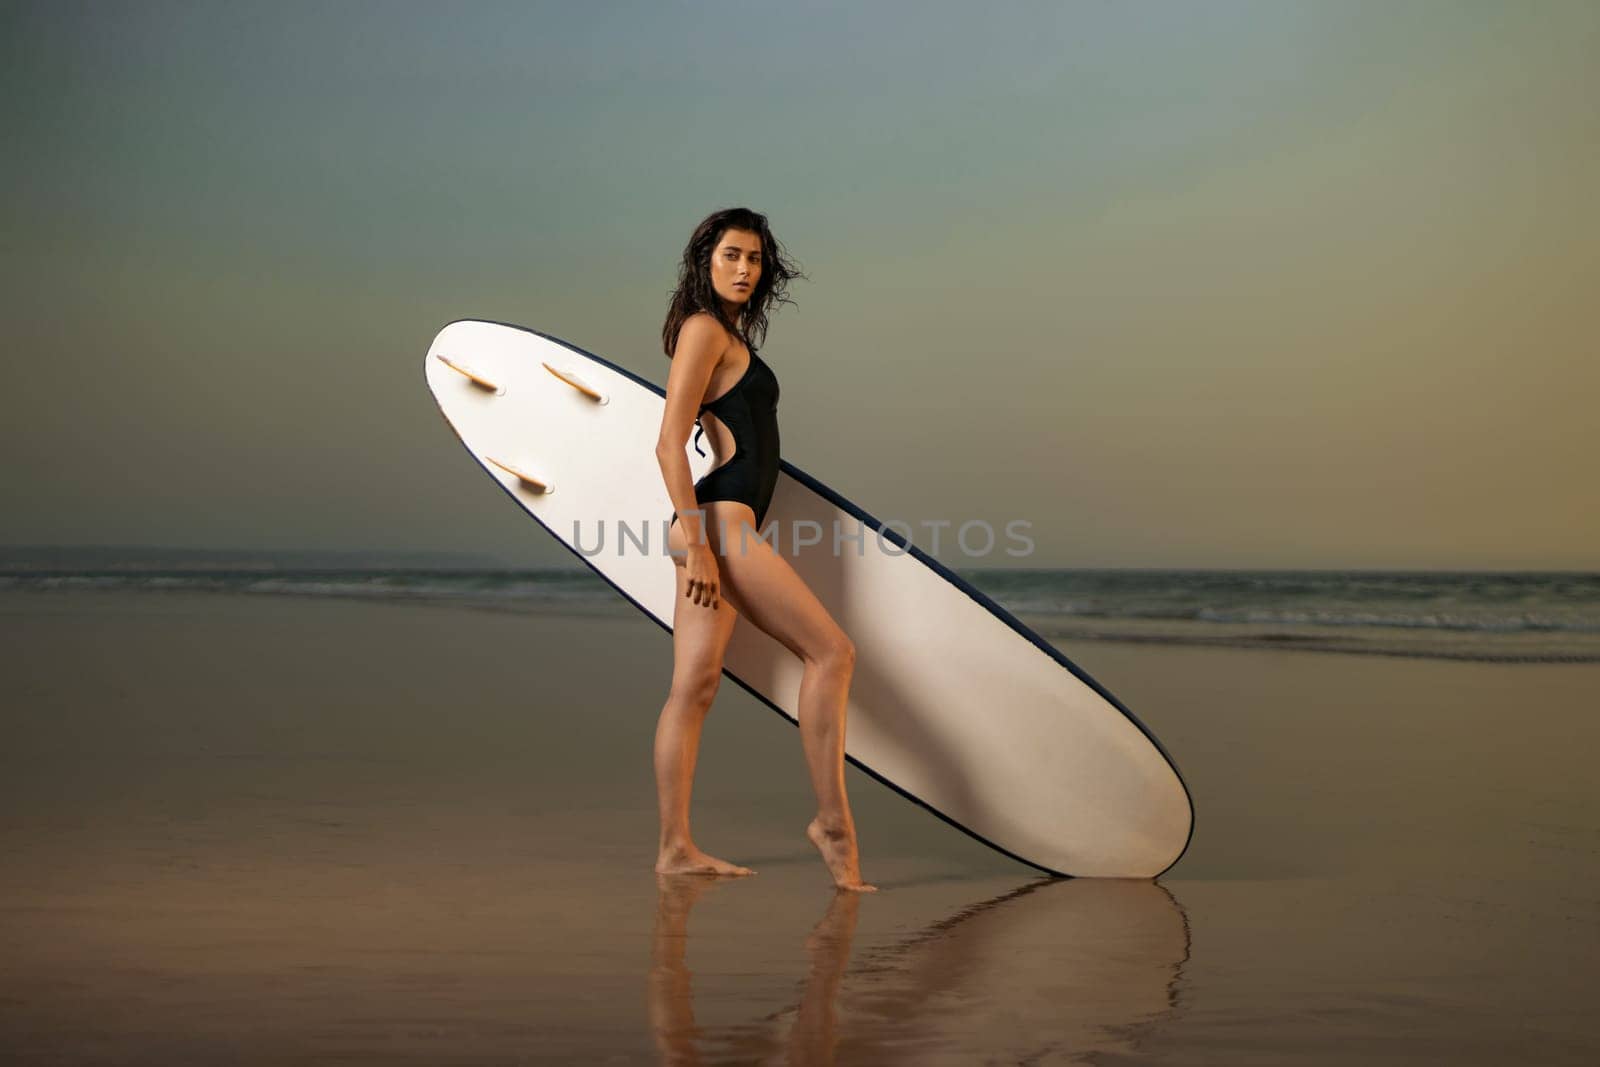 Download high resolution photo of a surfer girl. Advertisement for surfing in Nazare, Portugal